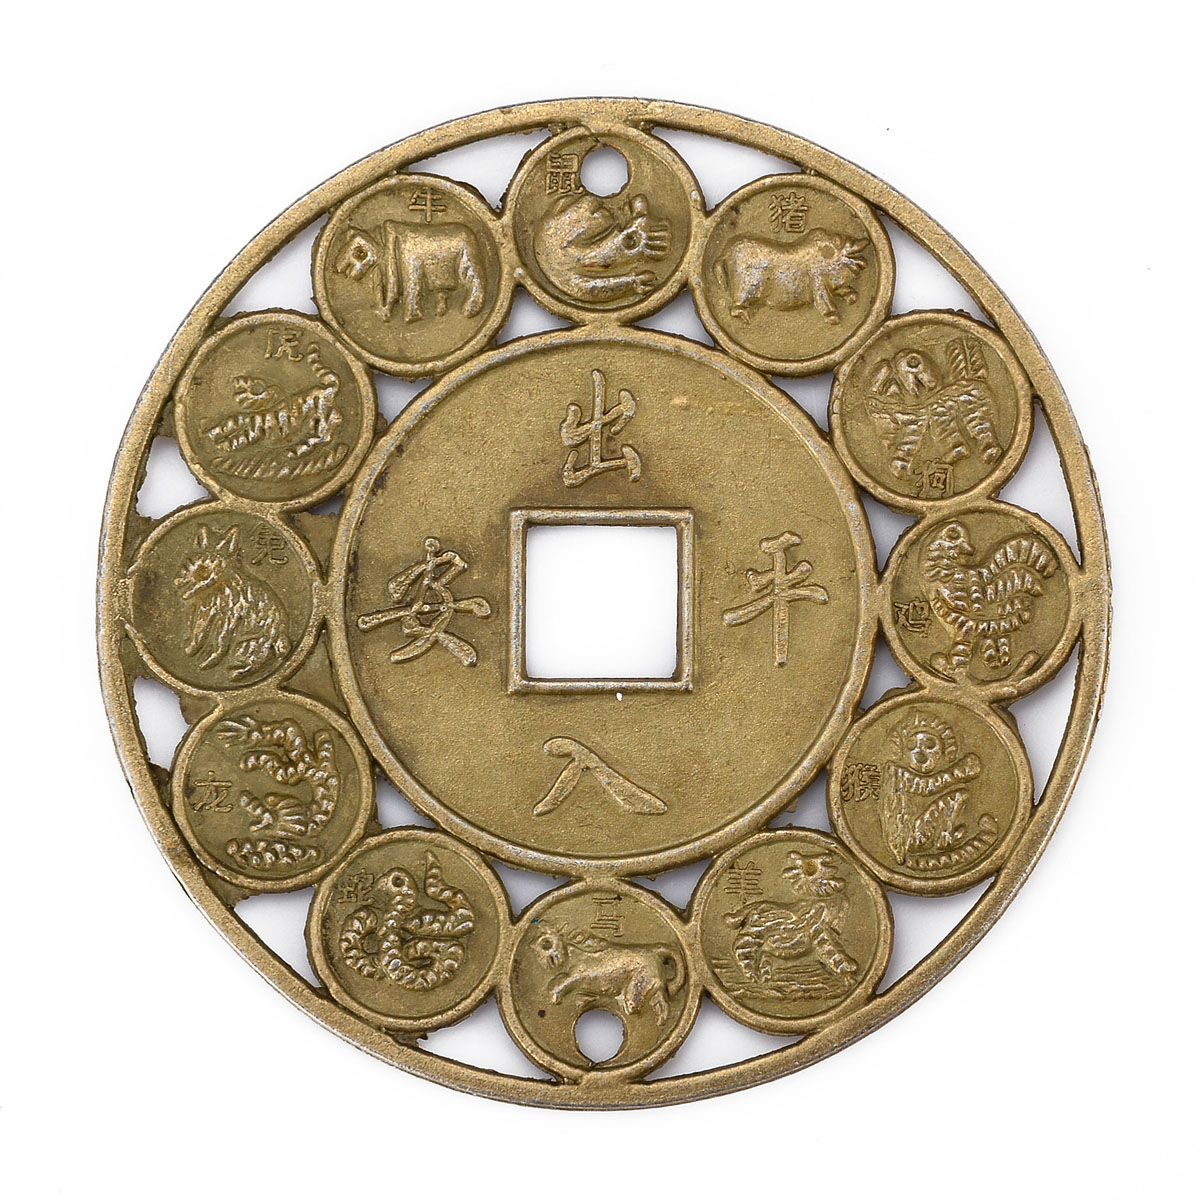 10PCS 4.5cm Alloy Auspicious Lucky Coin Chinese Zodiac Feng Shui Coins For Good Luck Amulet Prosperous Protection